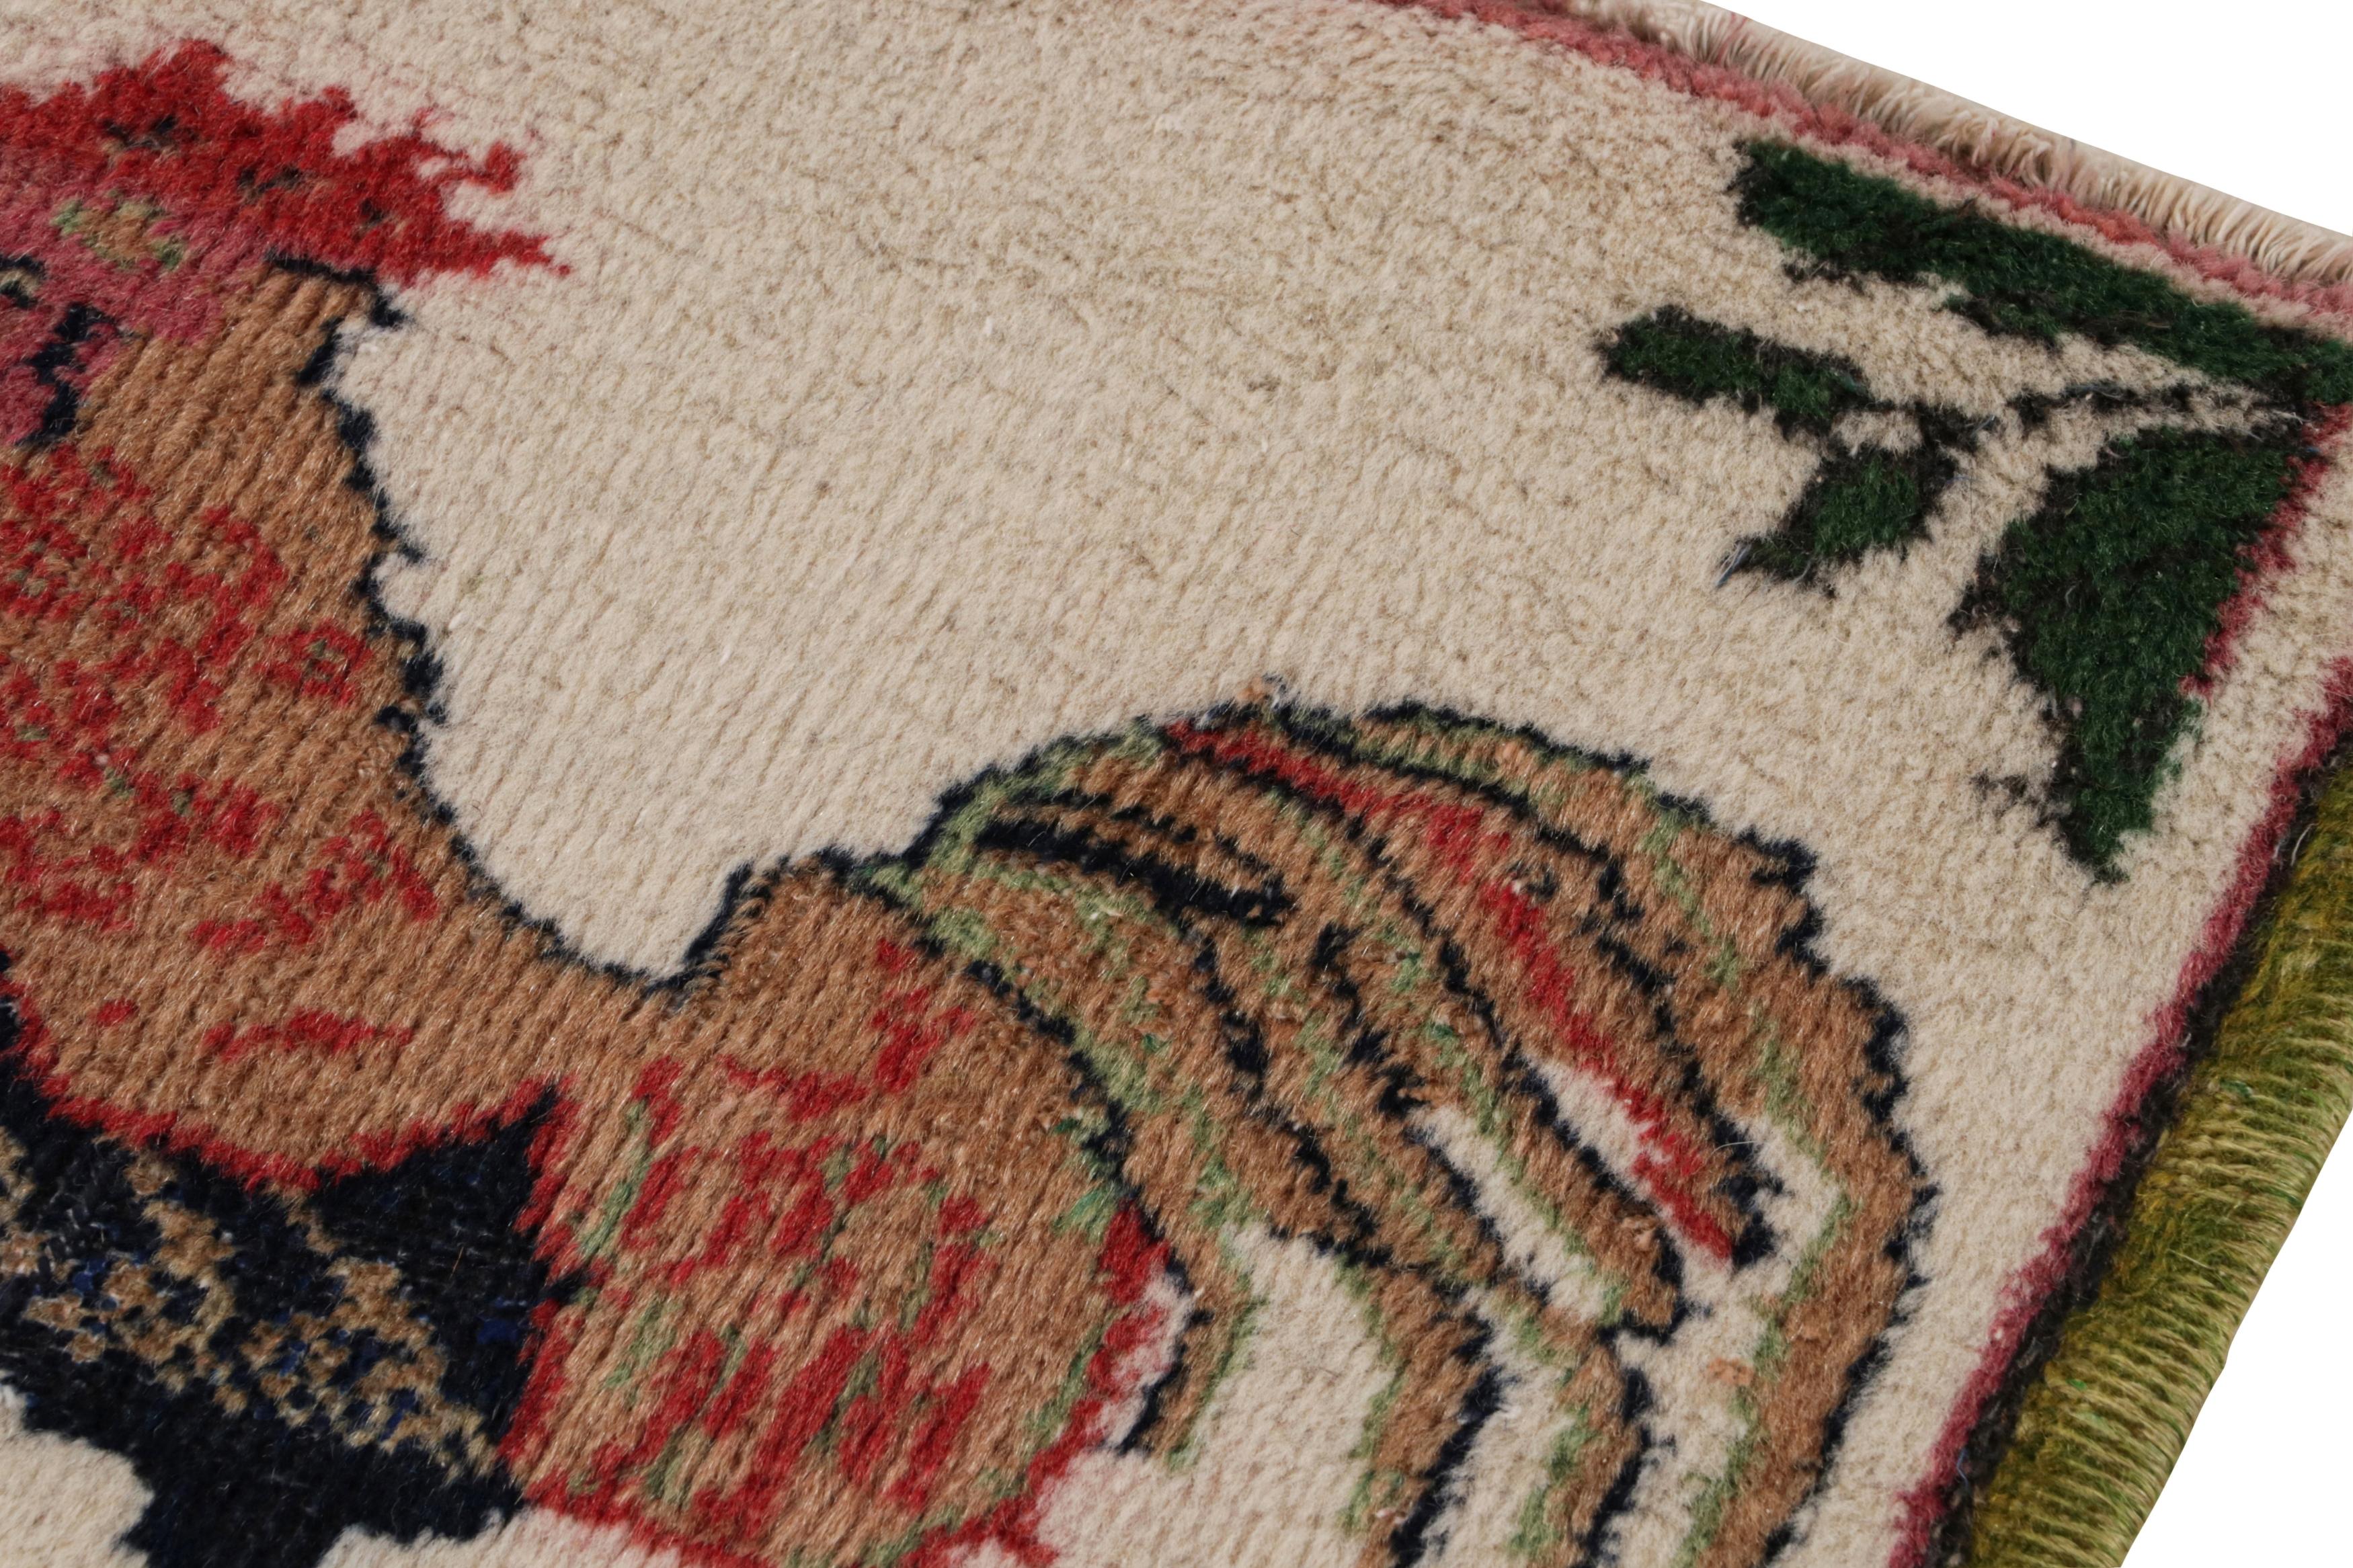 Vintage Signature Pictorial Rug with Rooster Drawings, from Rug & Kilim In Good Condition For Sale In Long Island City, NY